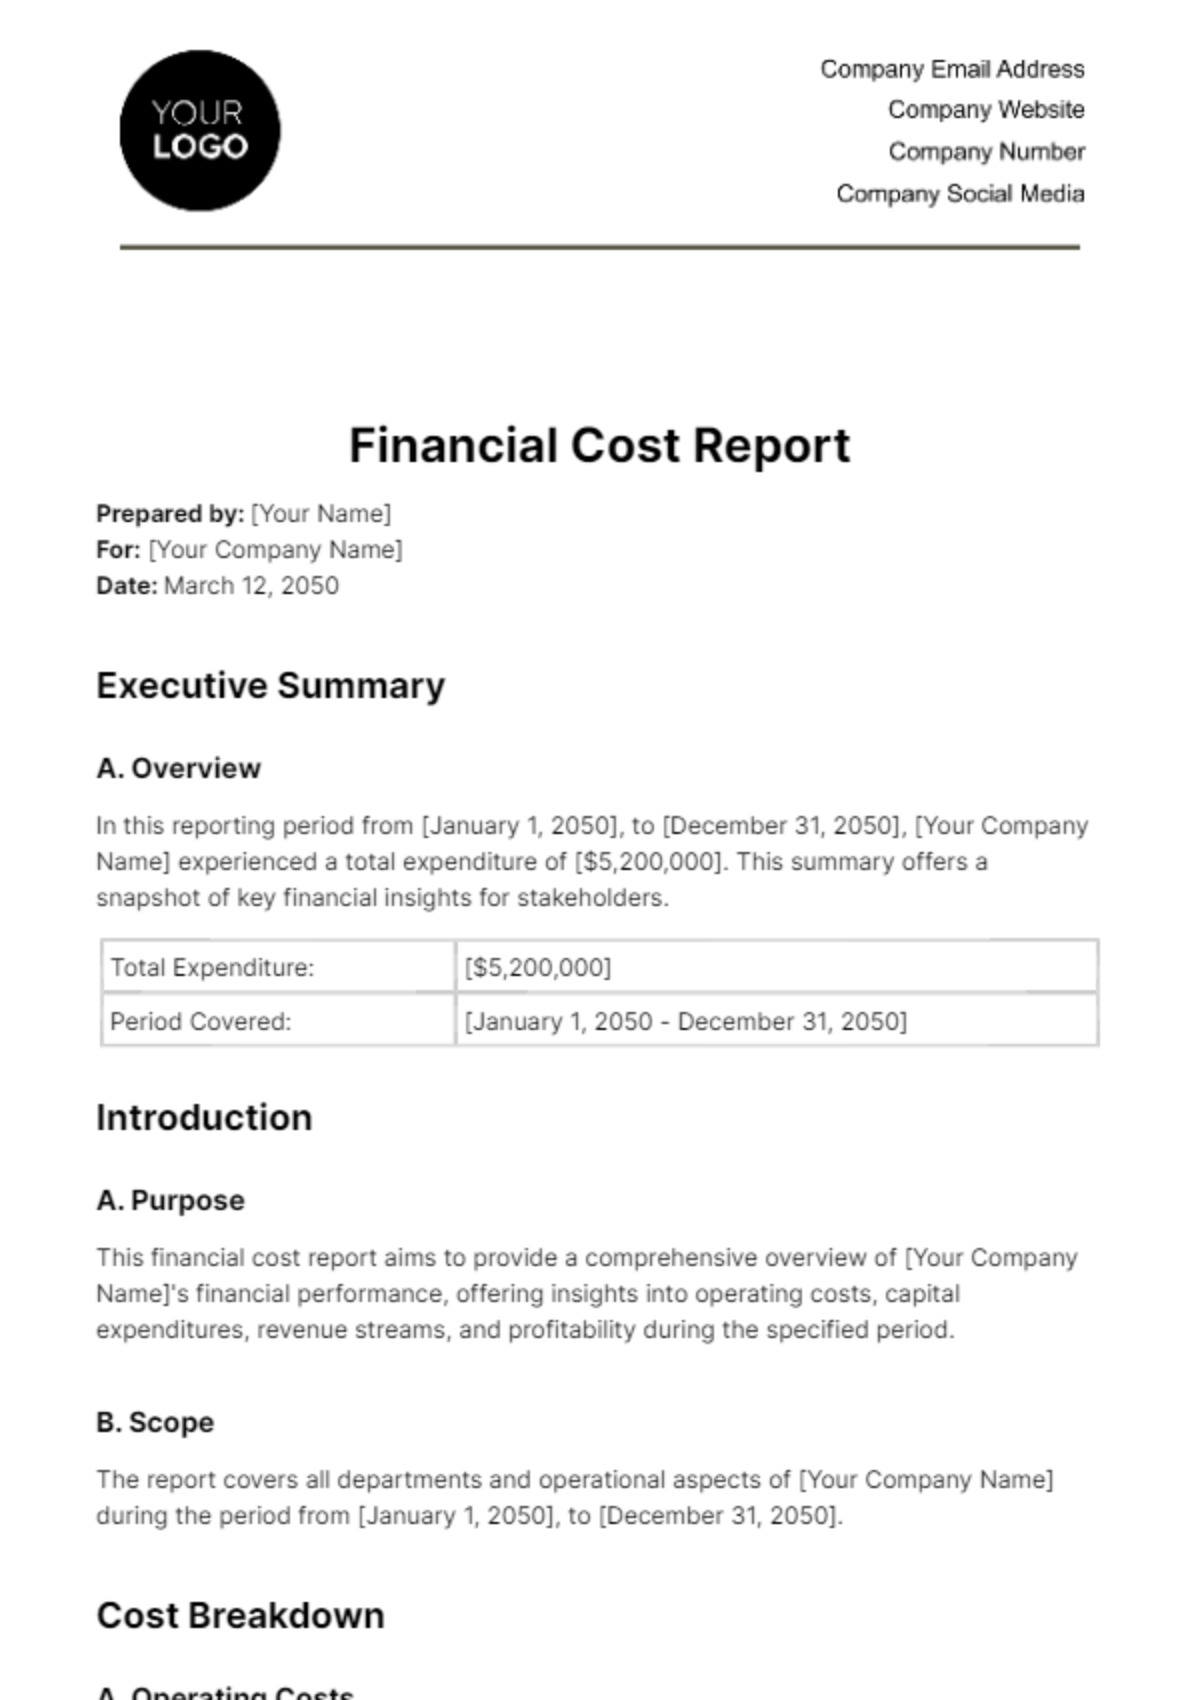 Free Financial Cost Report Template